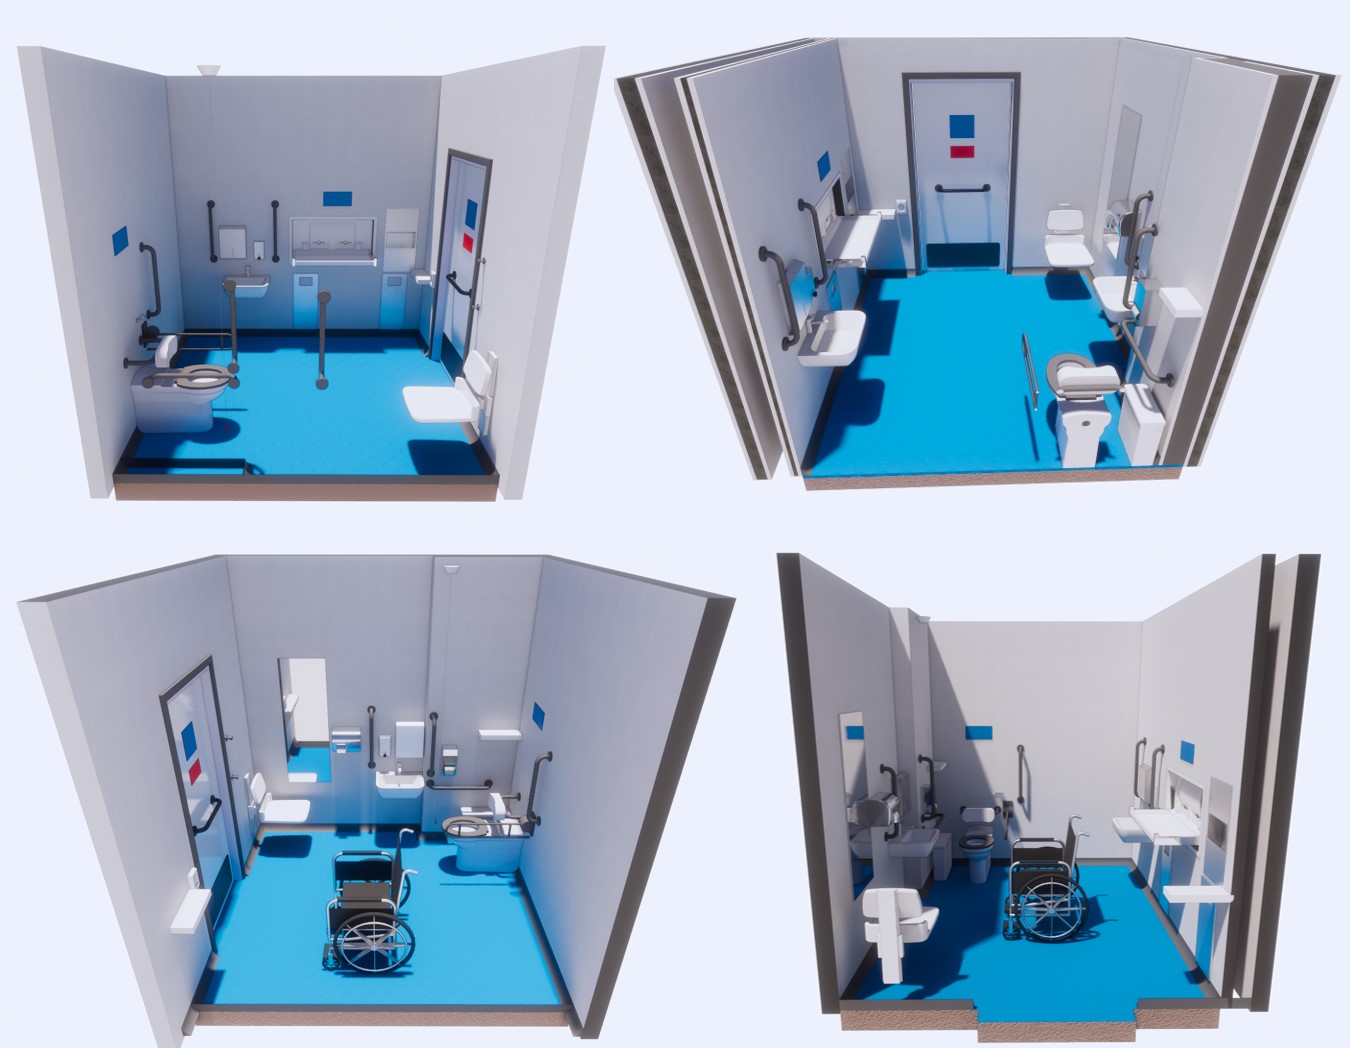 3D model of 4 different proposed layout designs for an  accessible toilet.
Top  two pictures show the layout without a wheelchair, the bottom two pictures show the layout with a wheelchair 